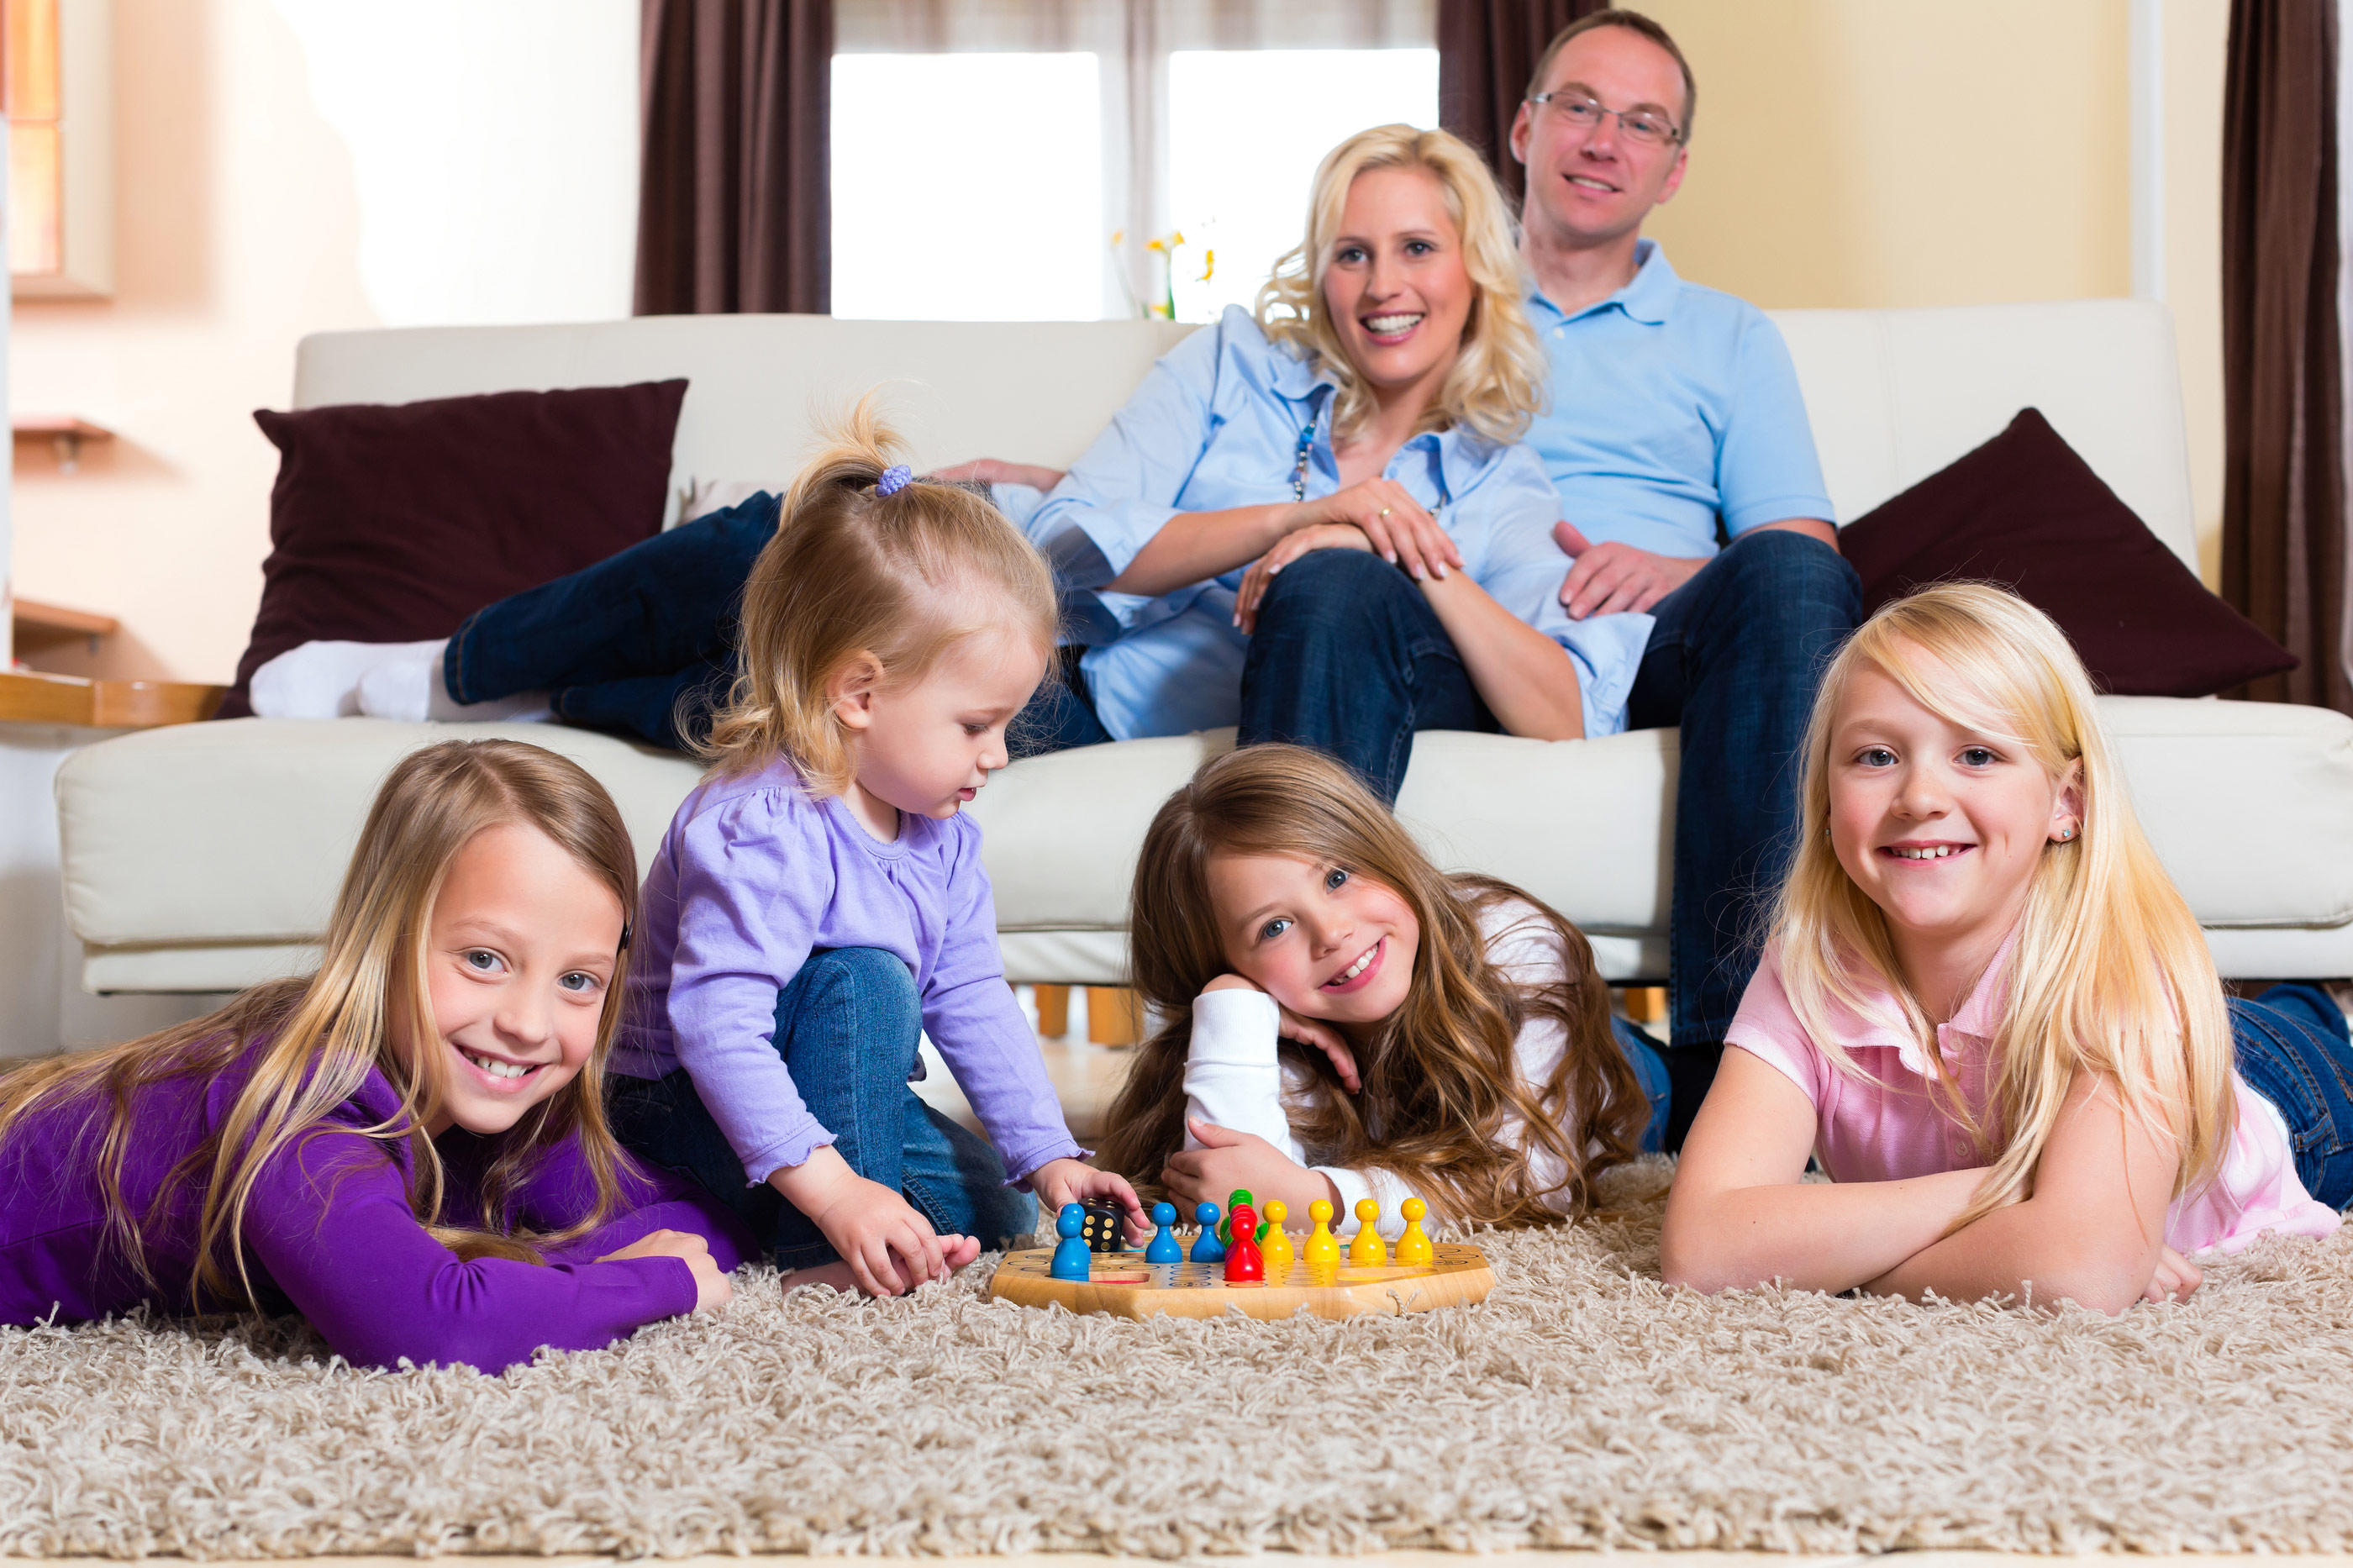 If you have kids in the home, you need a carpet cleaning more than most!